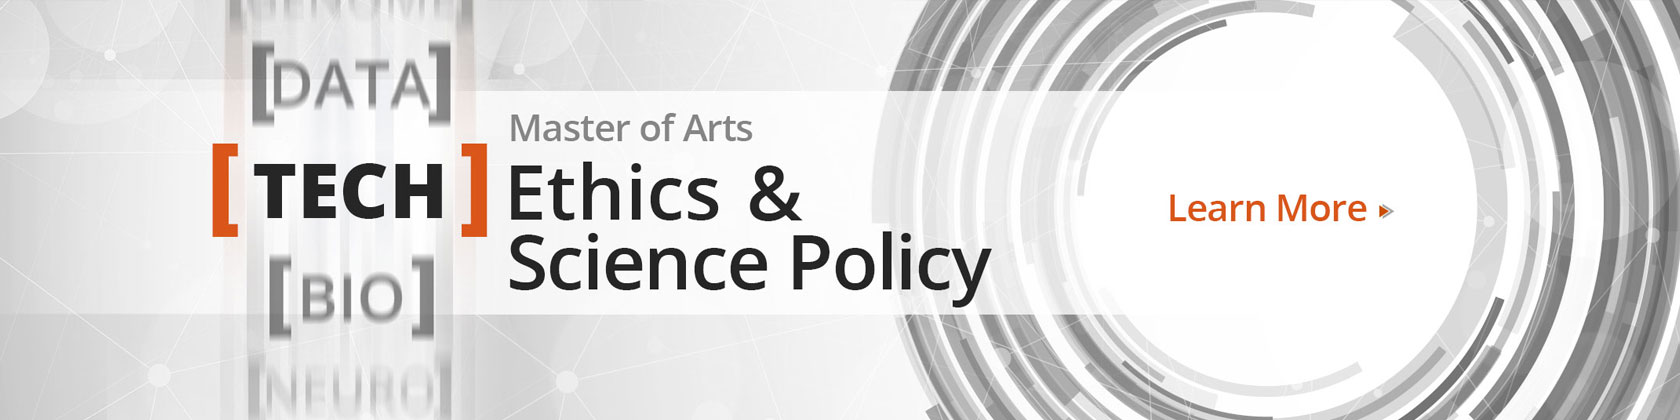 Master of Arts in Tech Ethics & Science Policy, Learn More